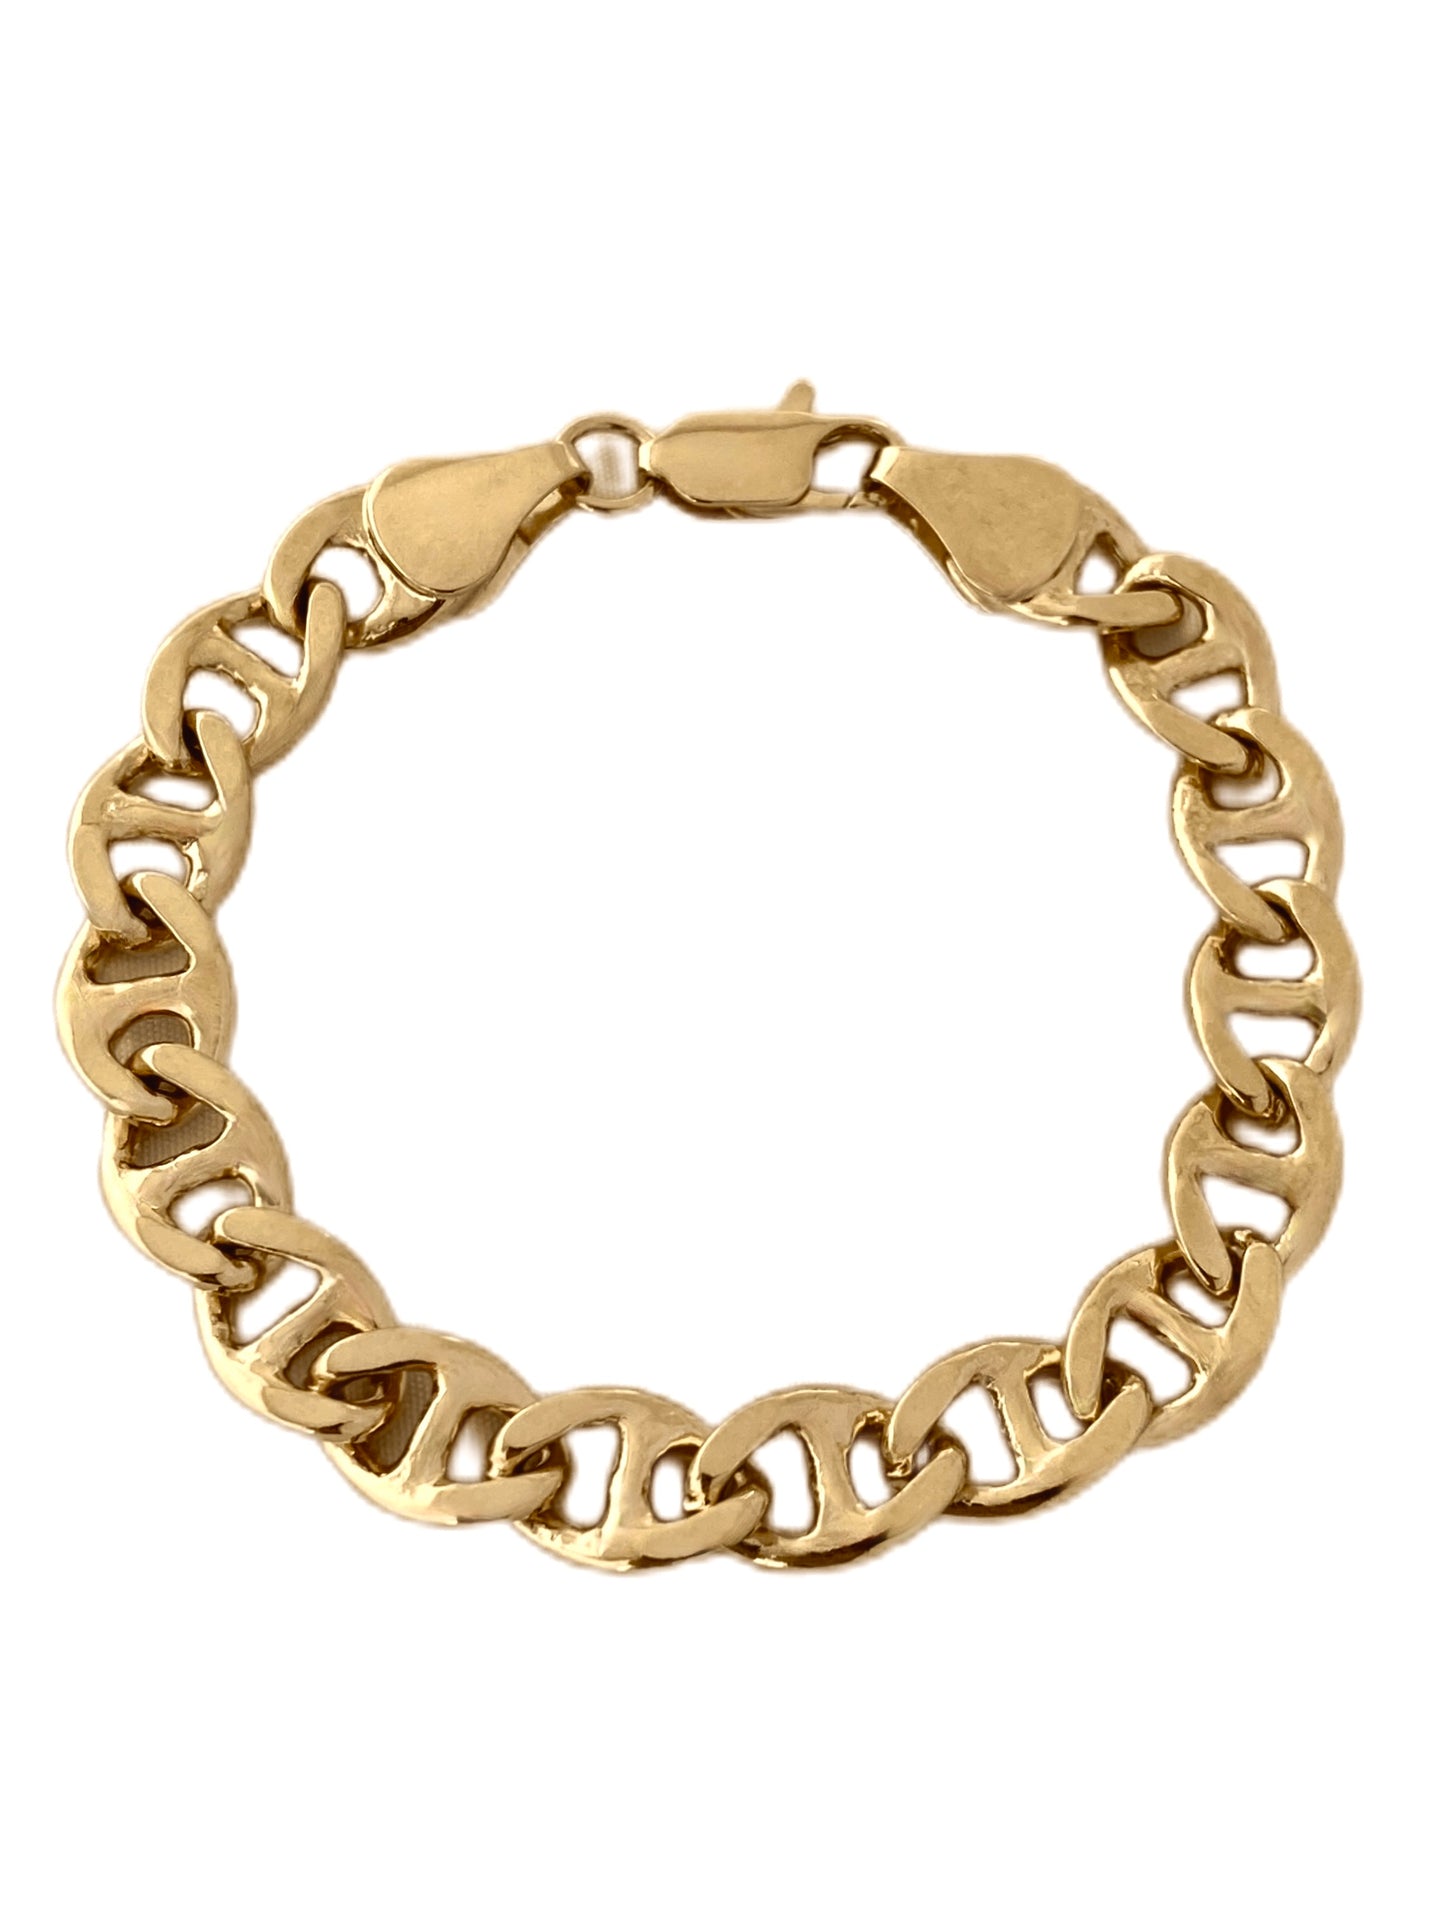 The Wolver Chain Bracelet